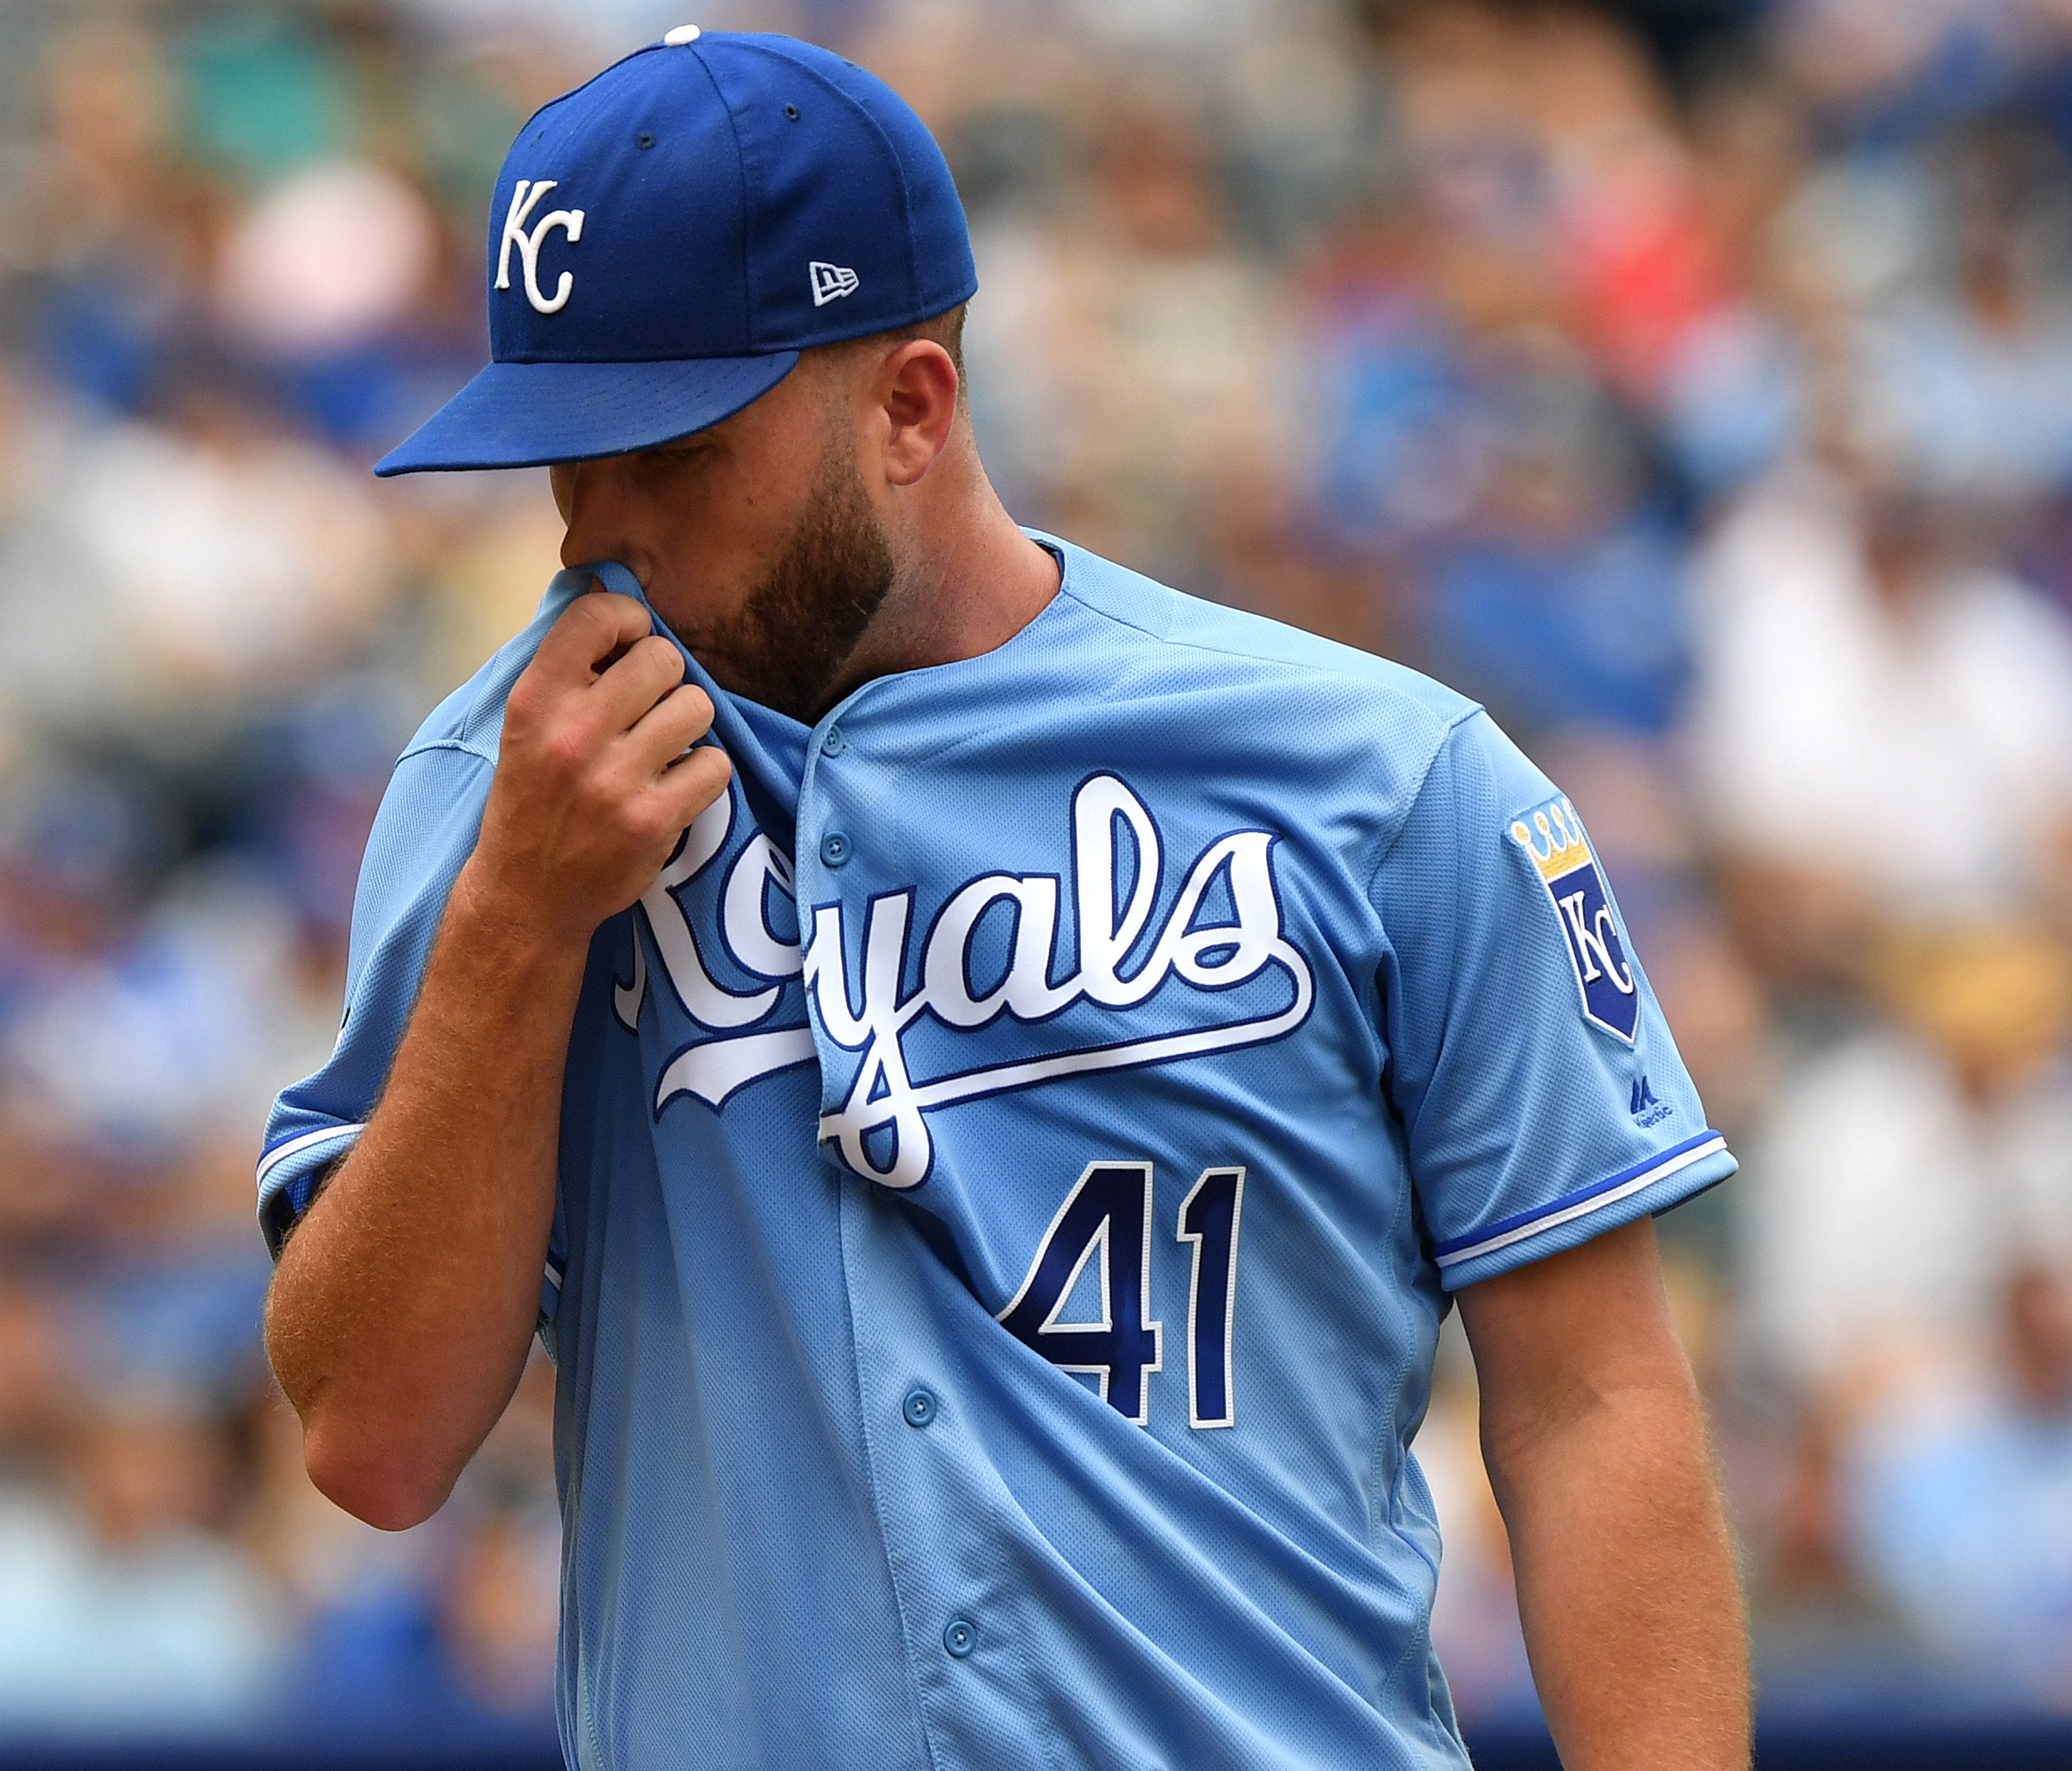 Danny Duffy is 8-8 with a 3.78 ERA in 21 starts.